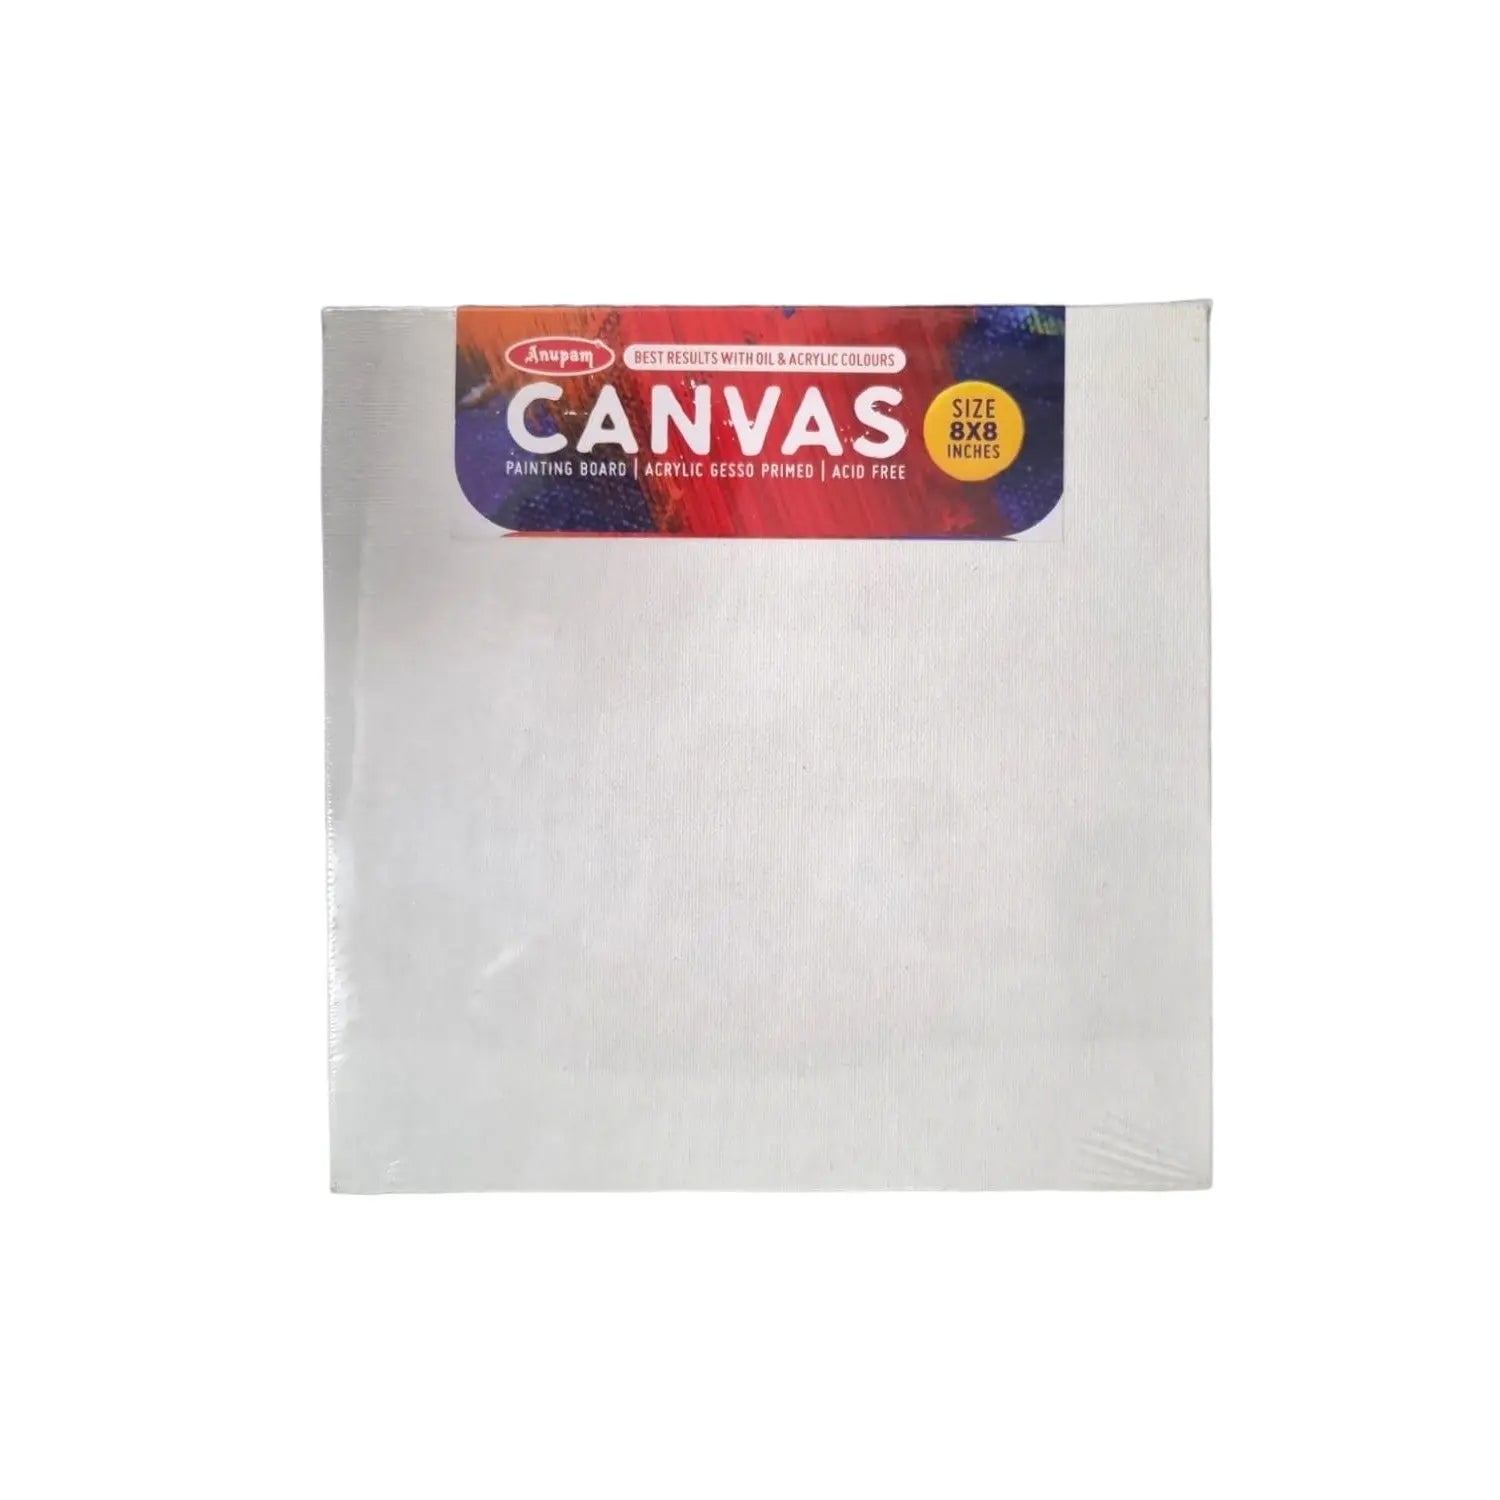 Anupam Canvas Board For Acrylic and Oil Painting Anupam